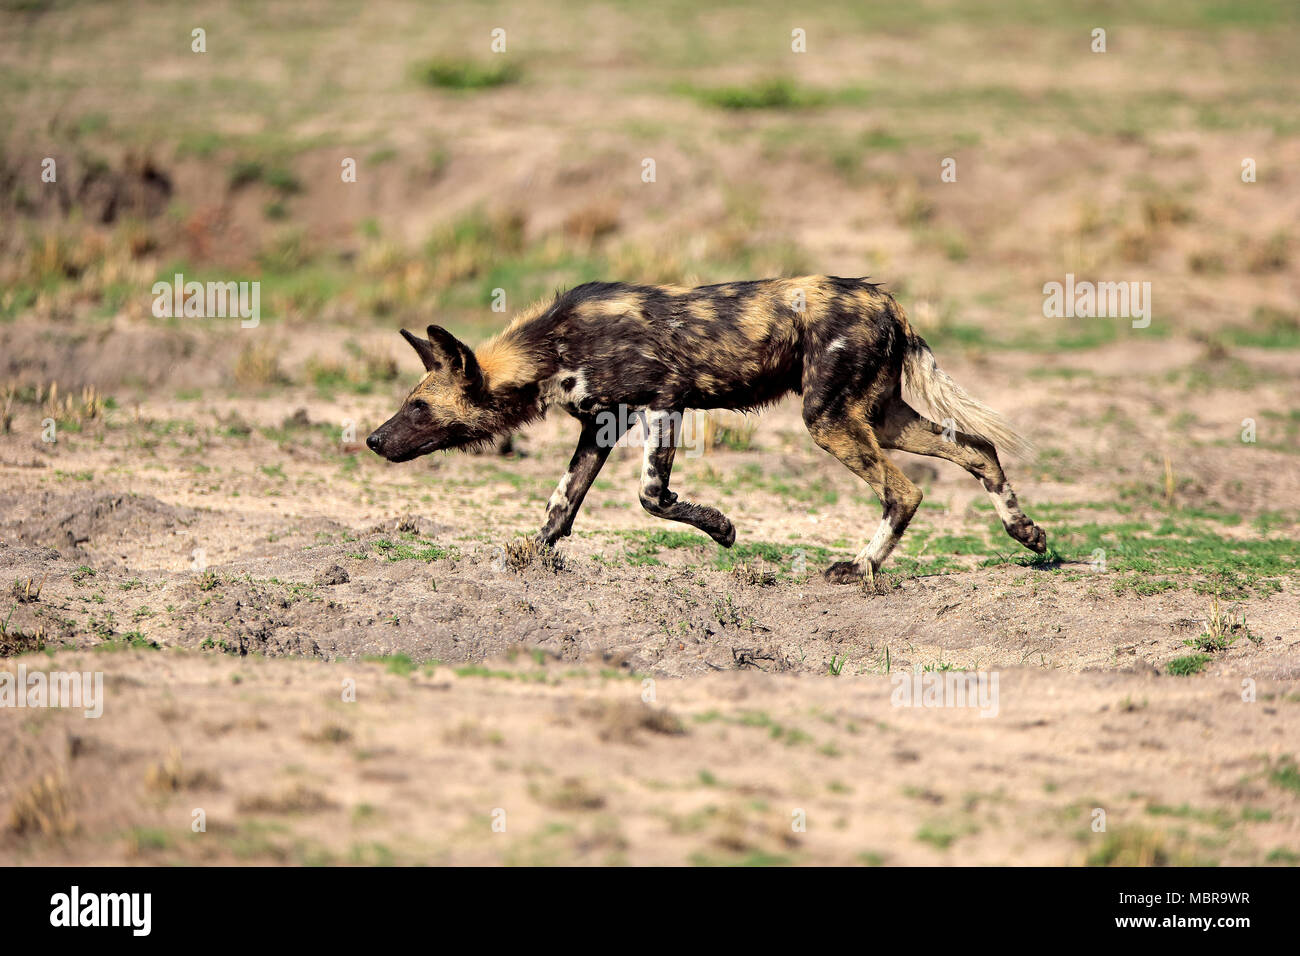 African wild dog (Lycaon pictus), adult, hunting, running, Sabi Sand Game Reserve, Kruger National Park, South Africa Stock Photo